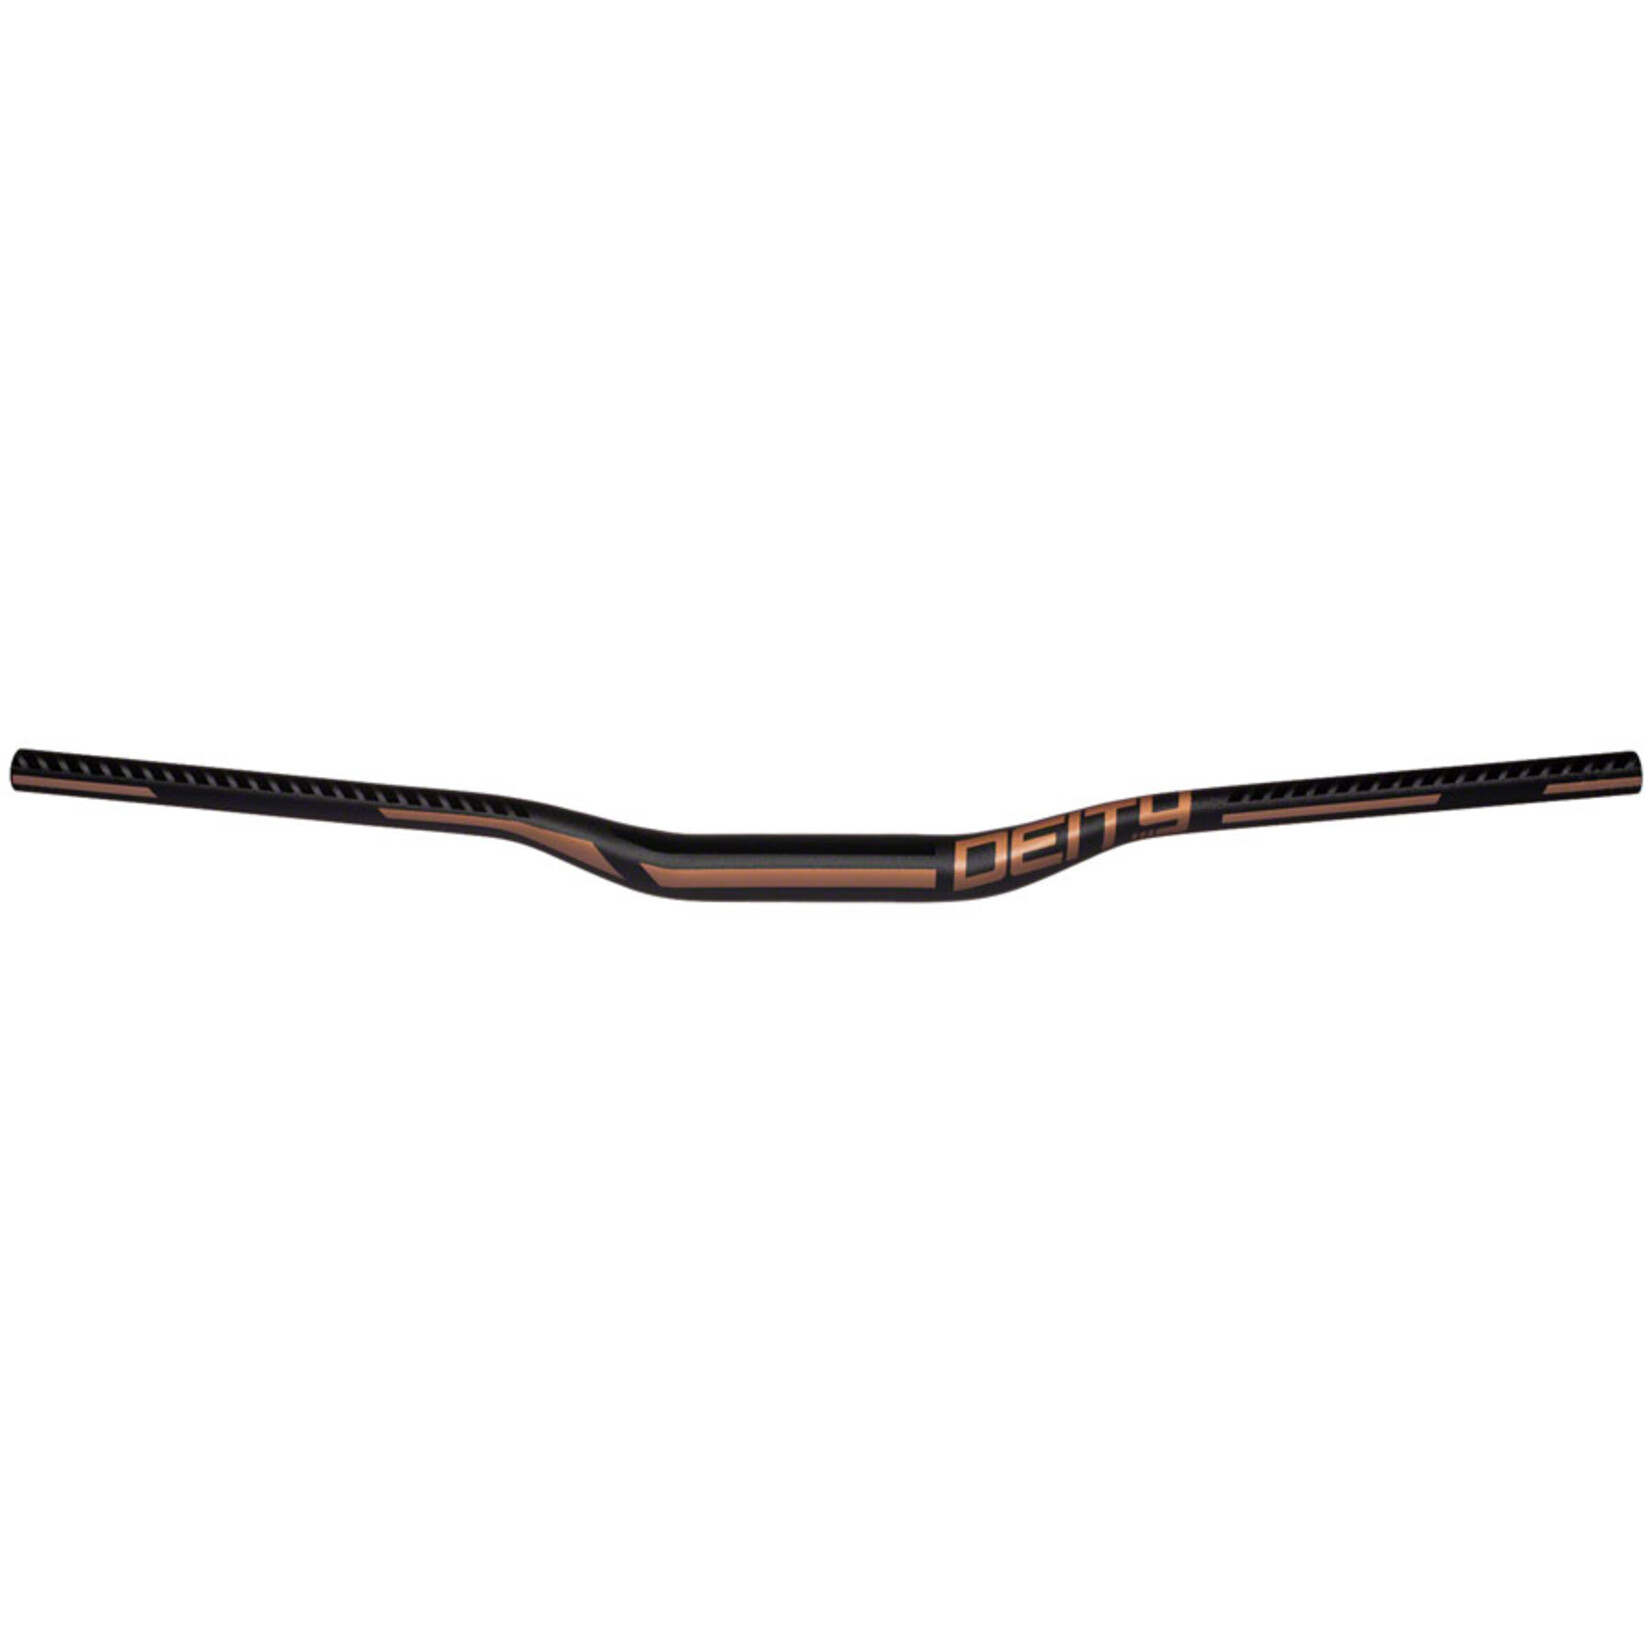 Deity Components Racepoint 35 Handlebar: 25mm Rise, 810mm Width, 35mm Clamp, Bronze